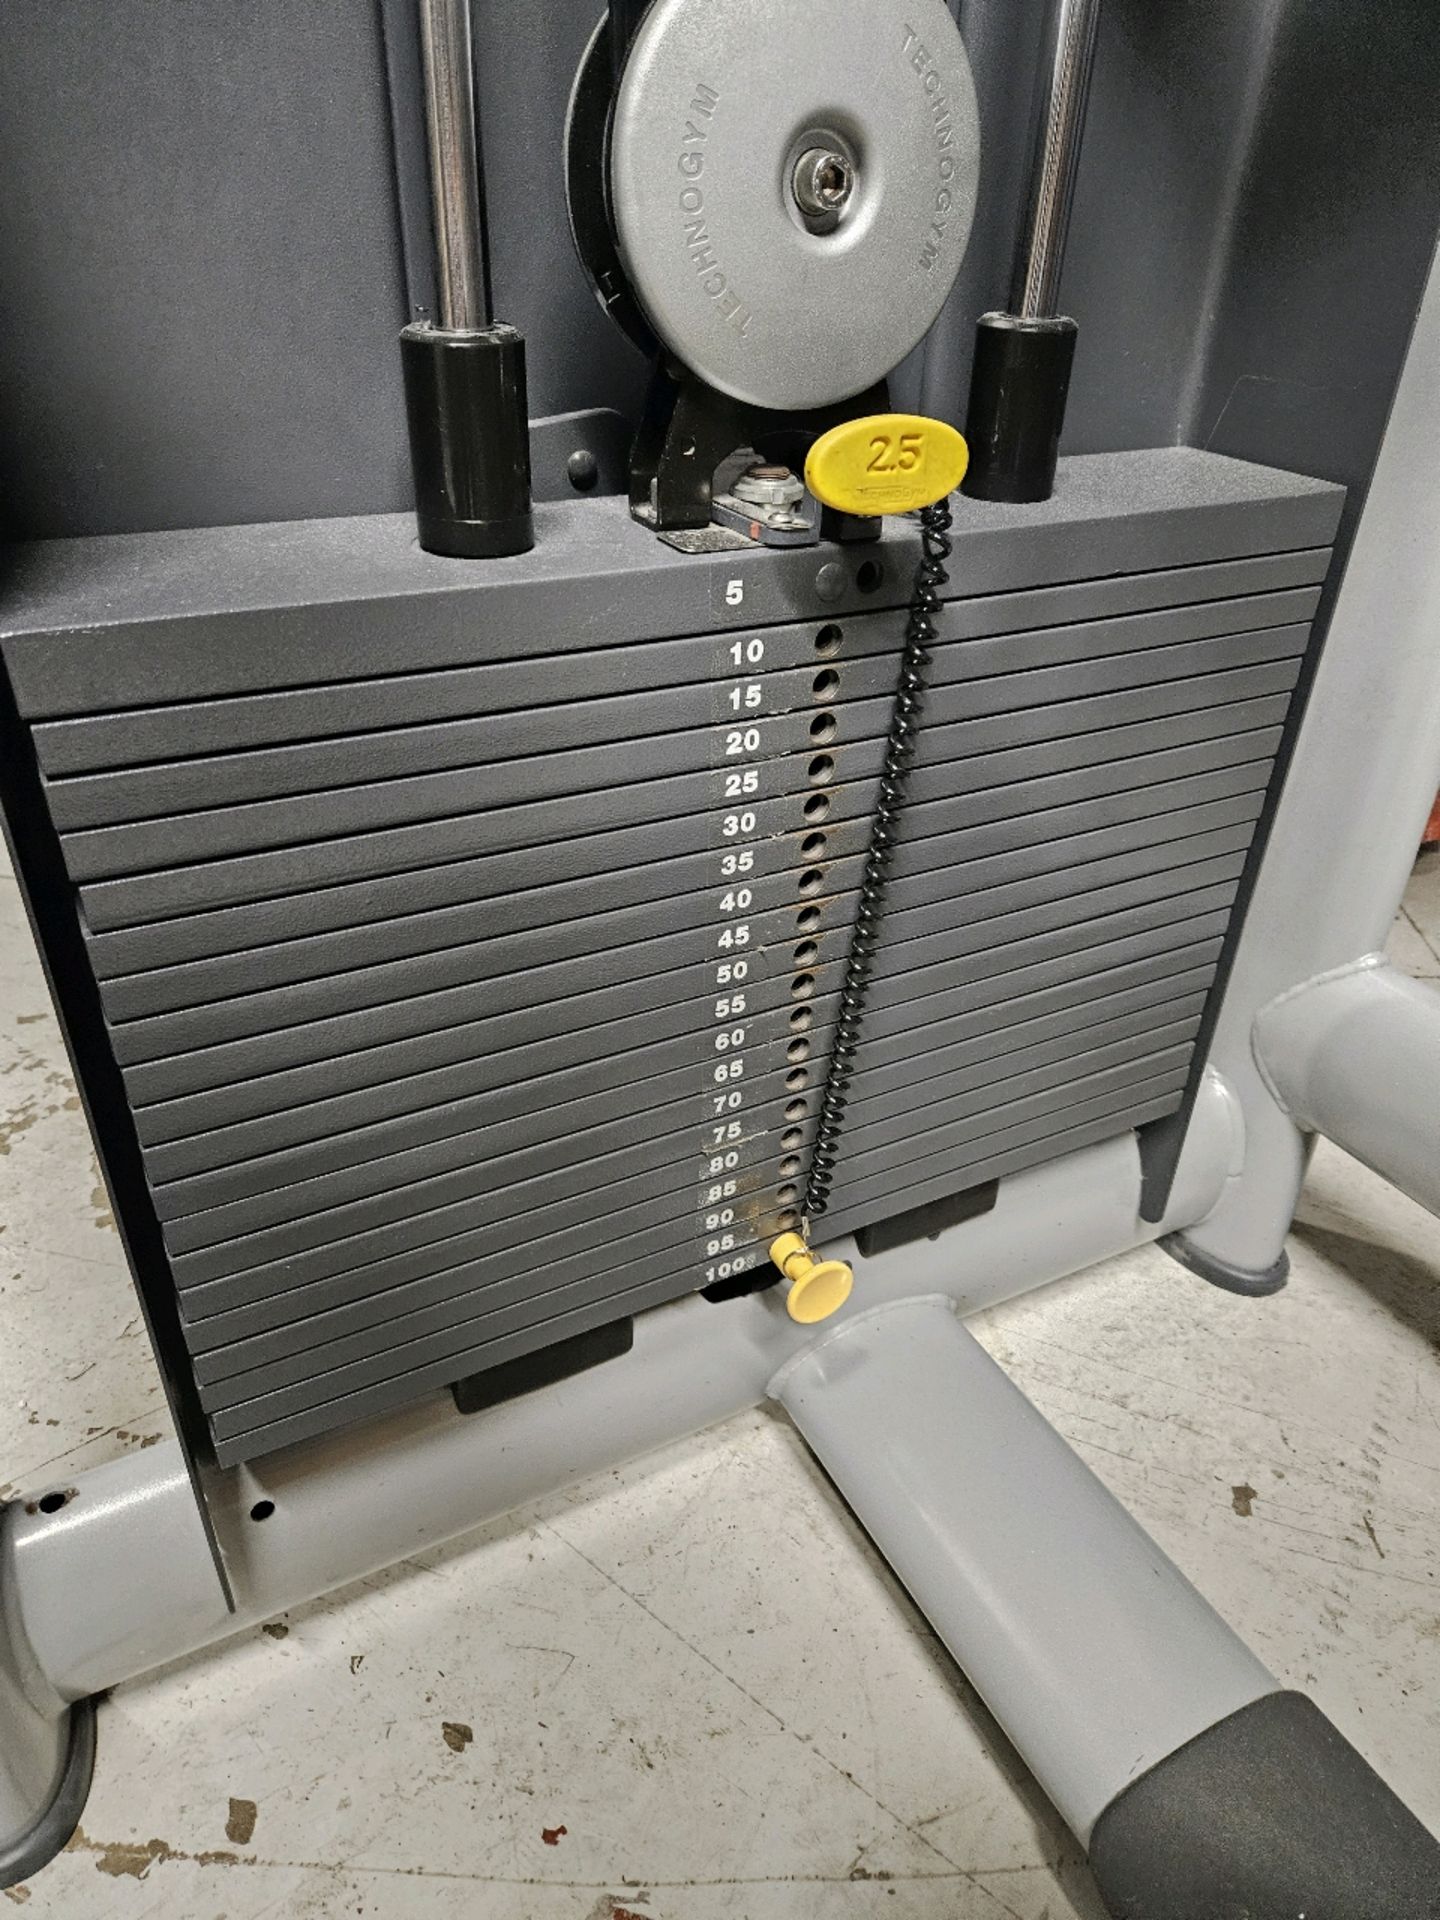 Technogym Chest Press From The Berkeley Hotel - Image 4 of 5